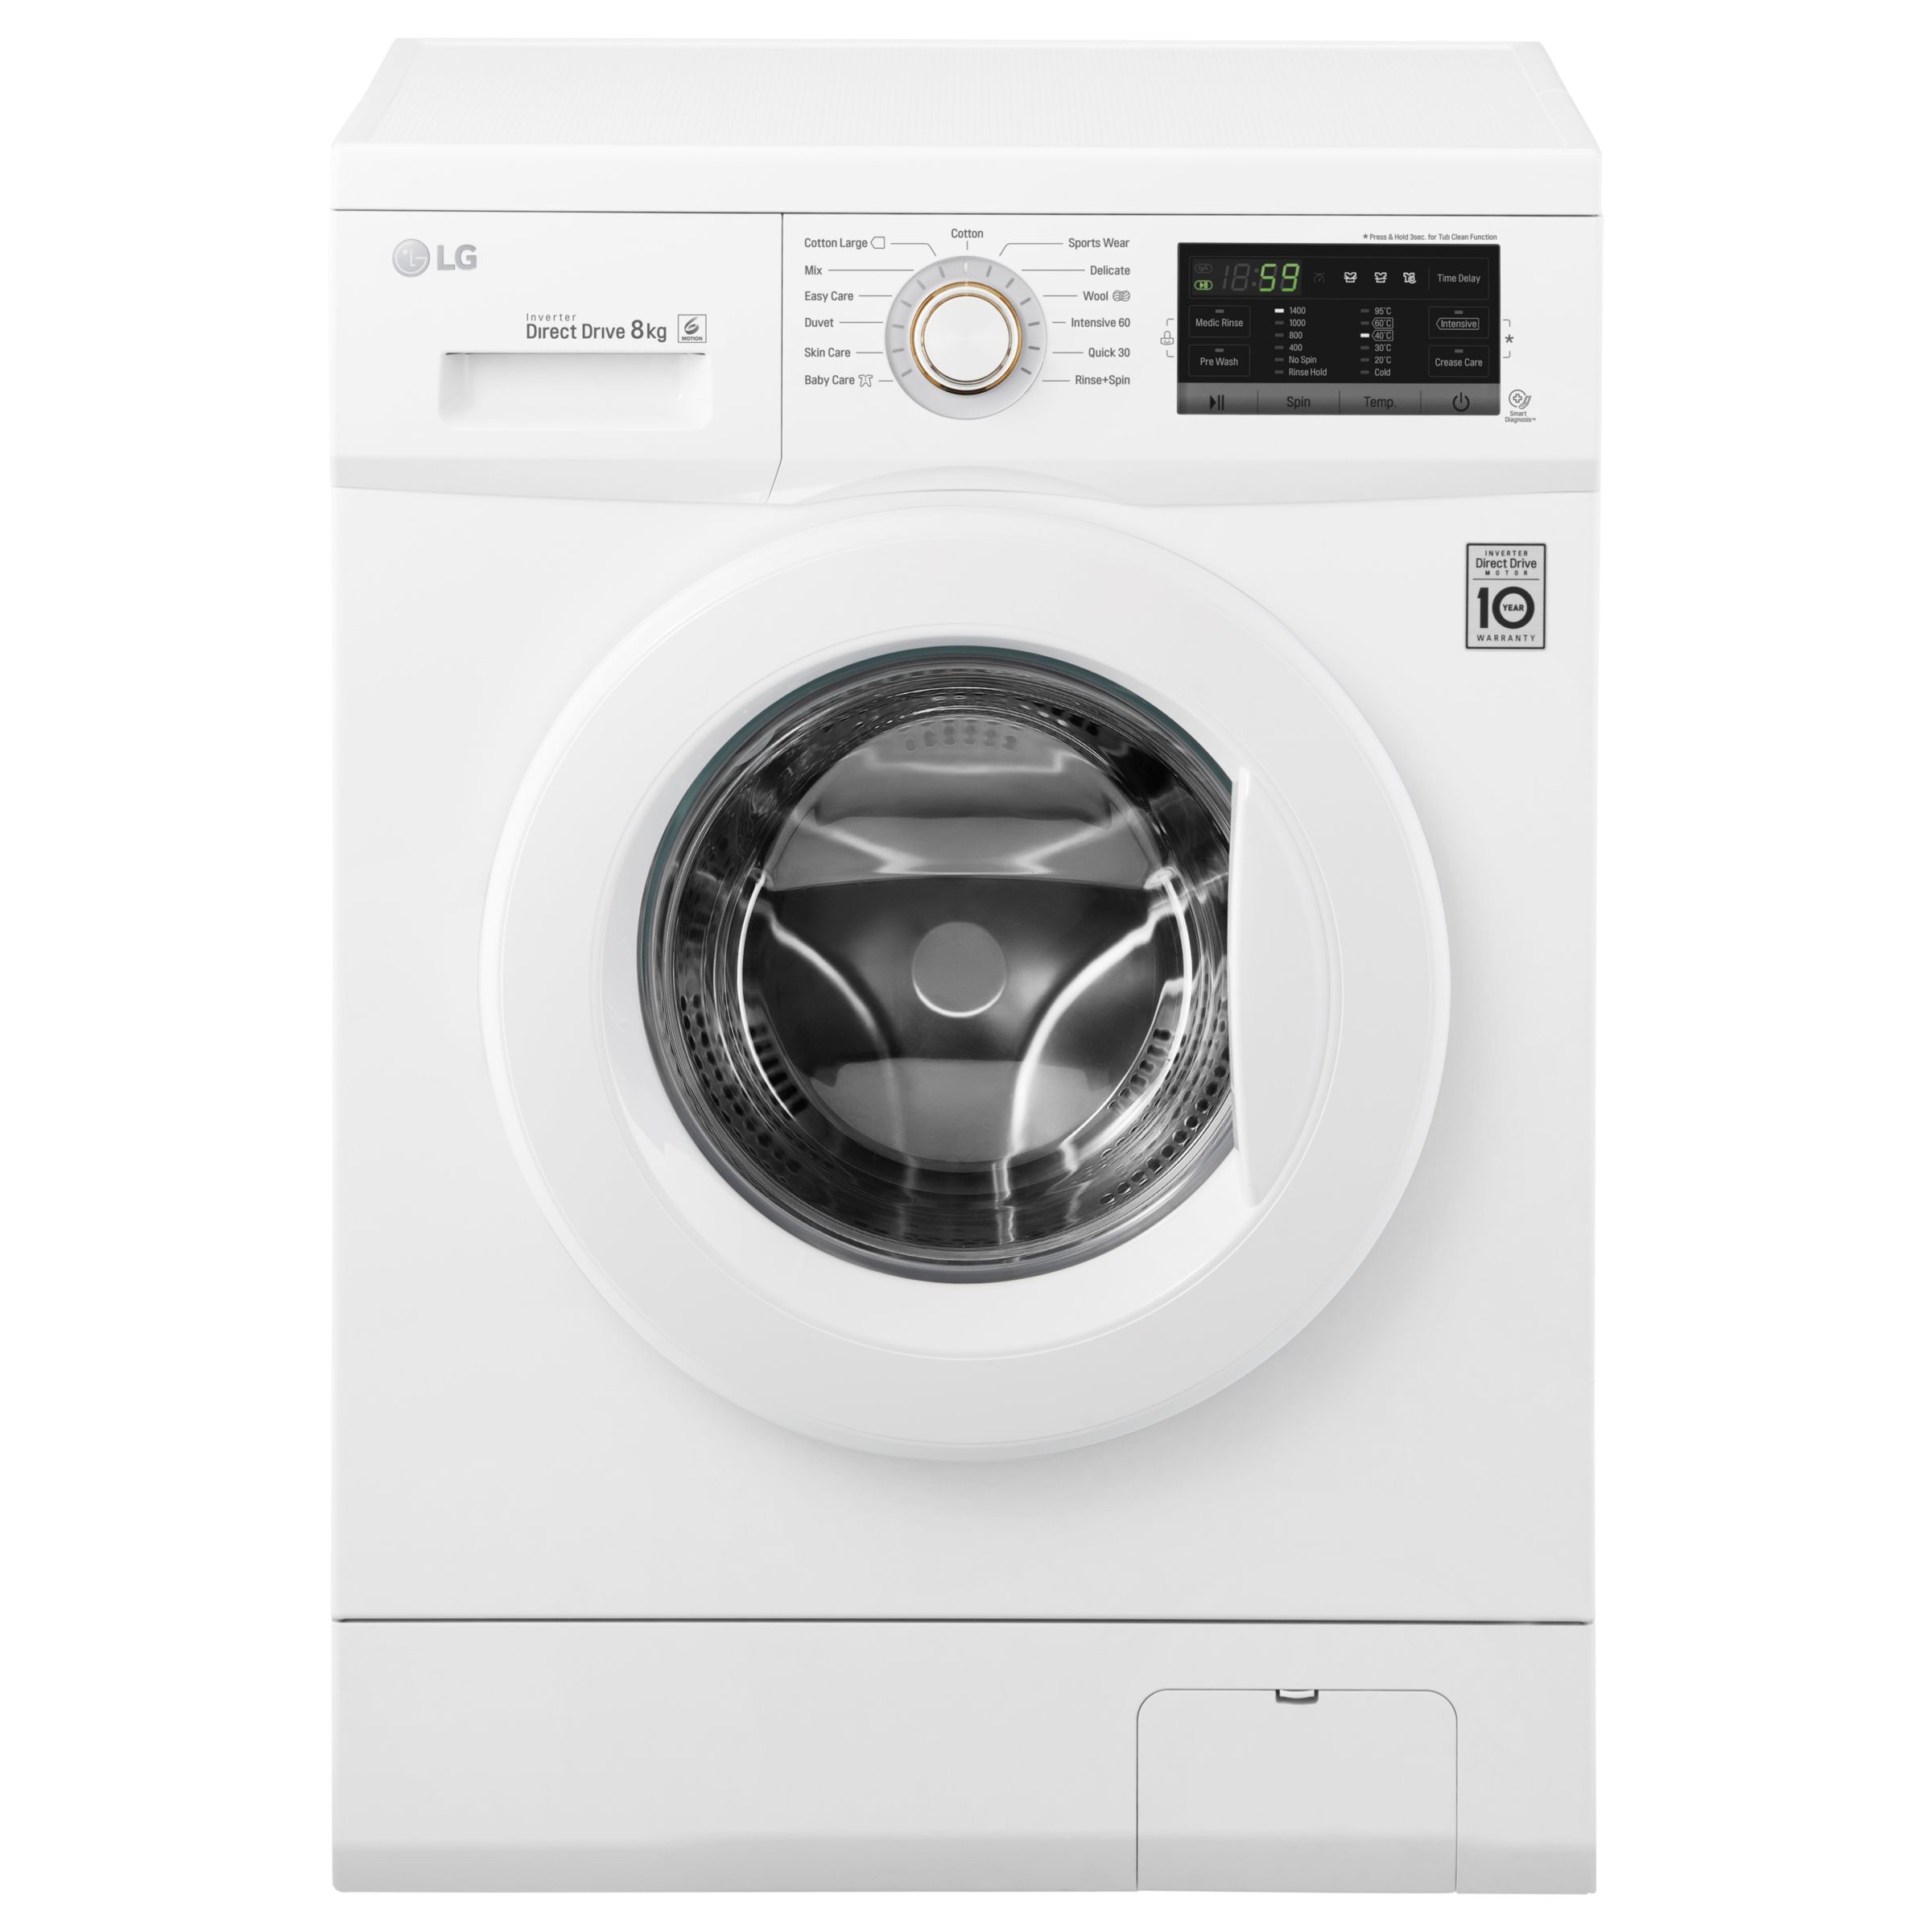 LG FH4G7TDN0 Freestanding Washing Machine, 8kg Load, A+++ Energy Rating, 1400rpm Spin in White